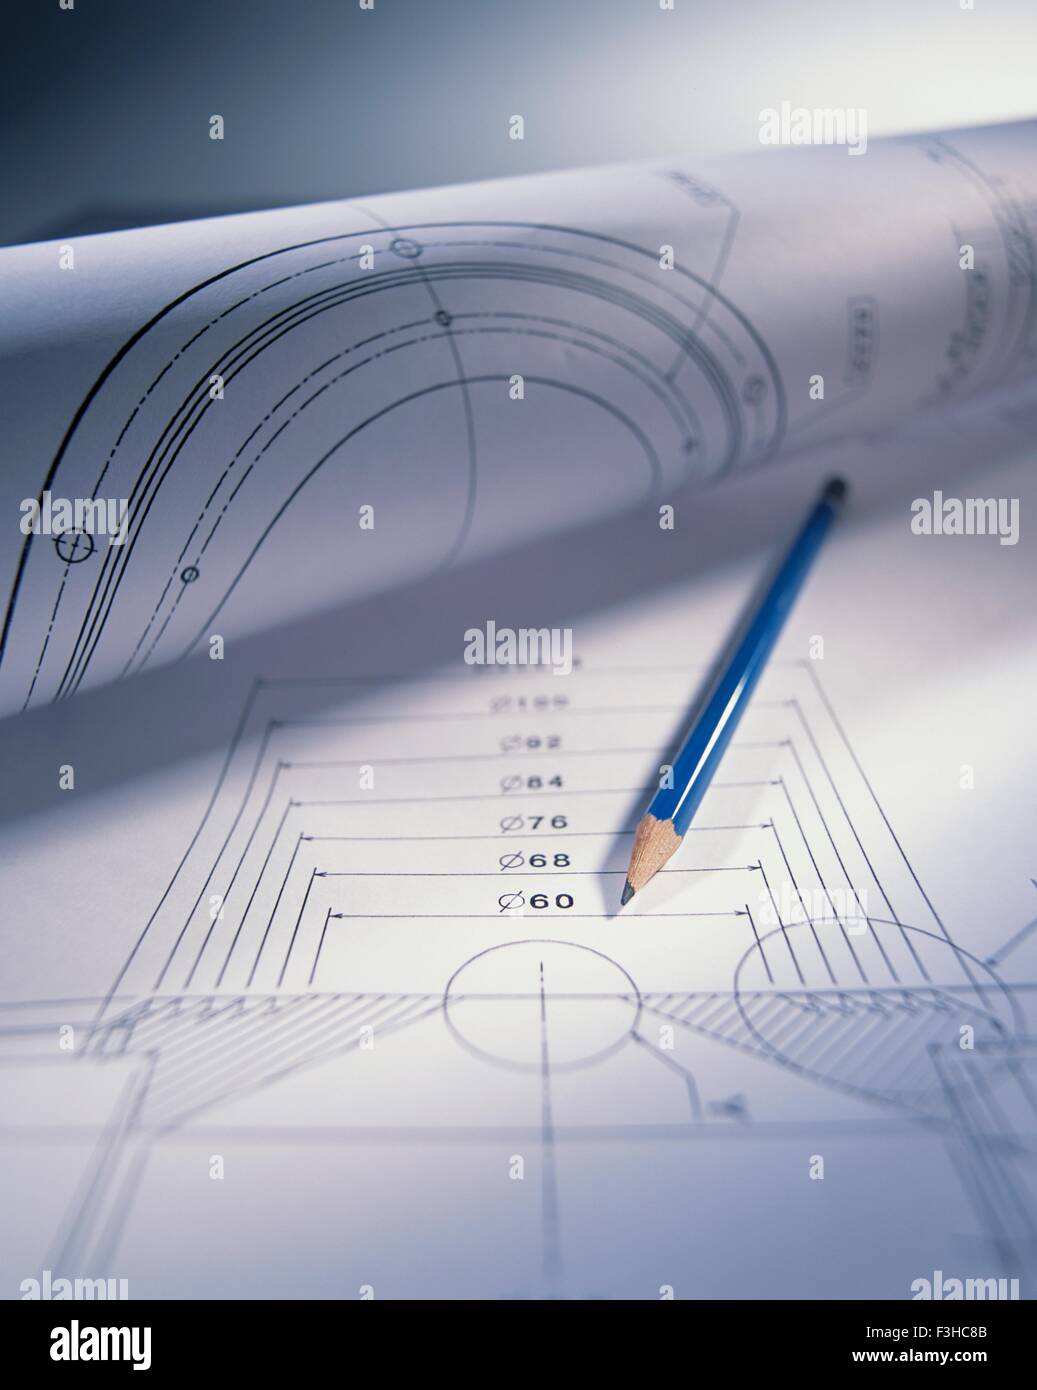 Engineering drawing and pencil Stock Photo